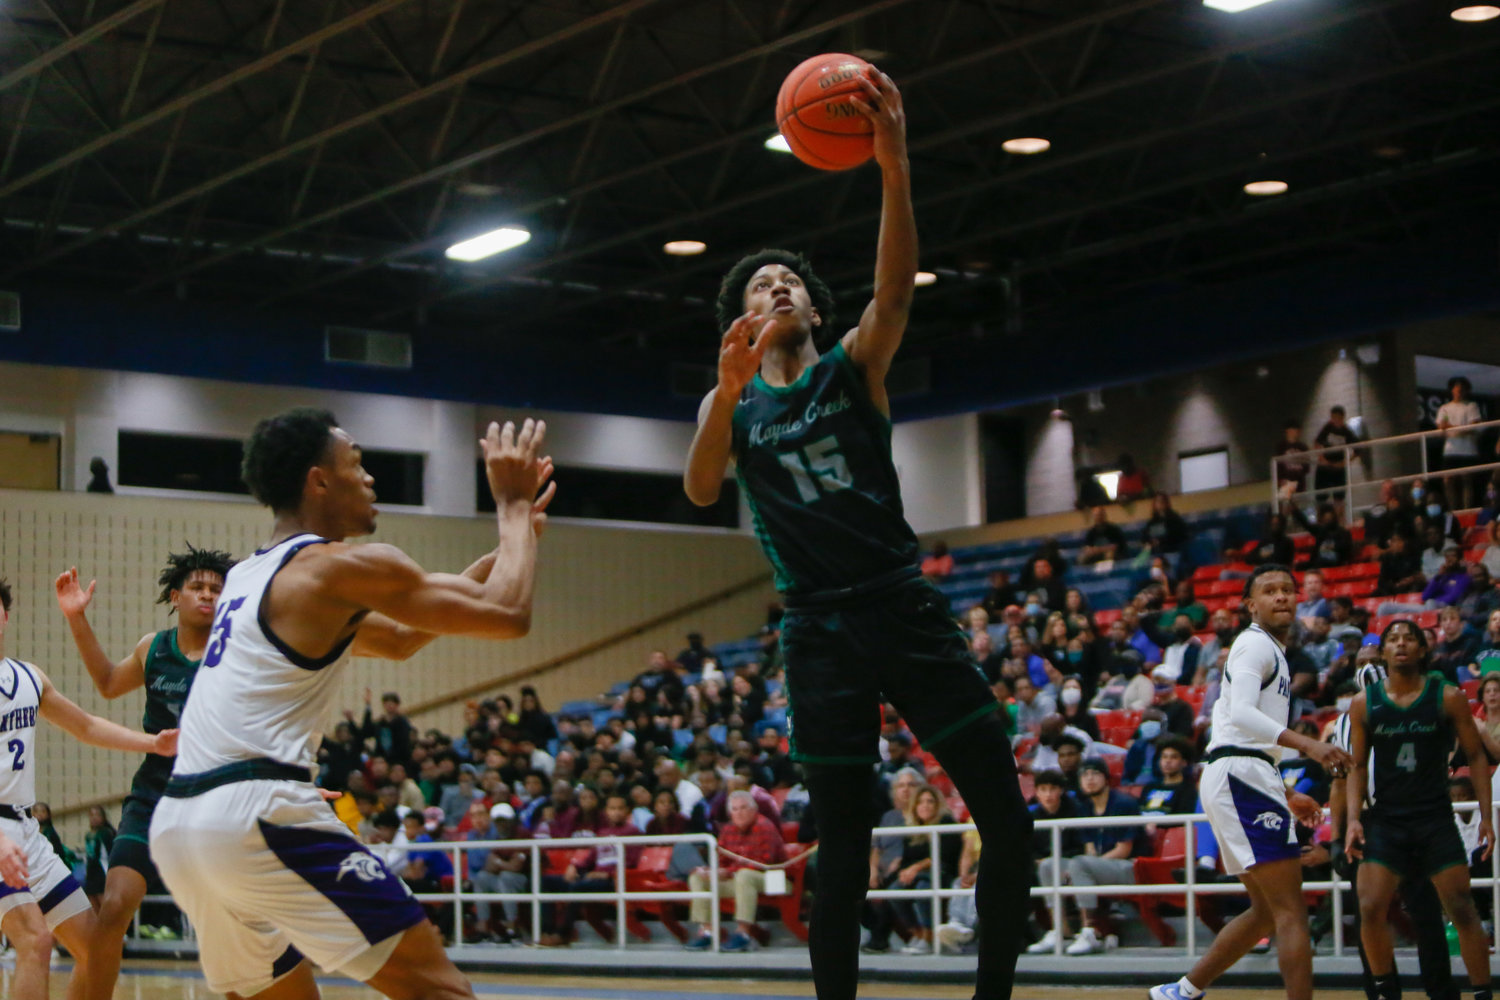 Jamal Chretien II shoots a layup during Tuesday's game against Ridge Point.